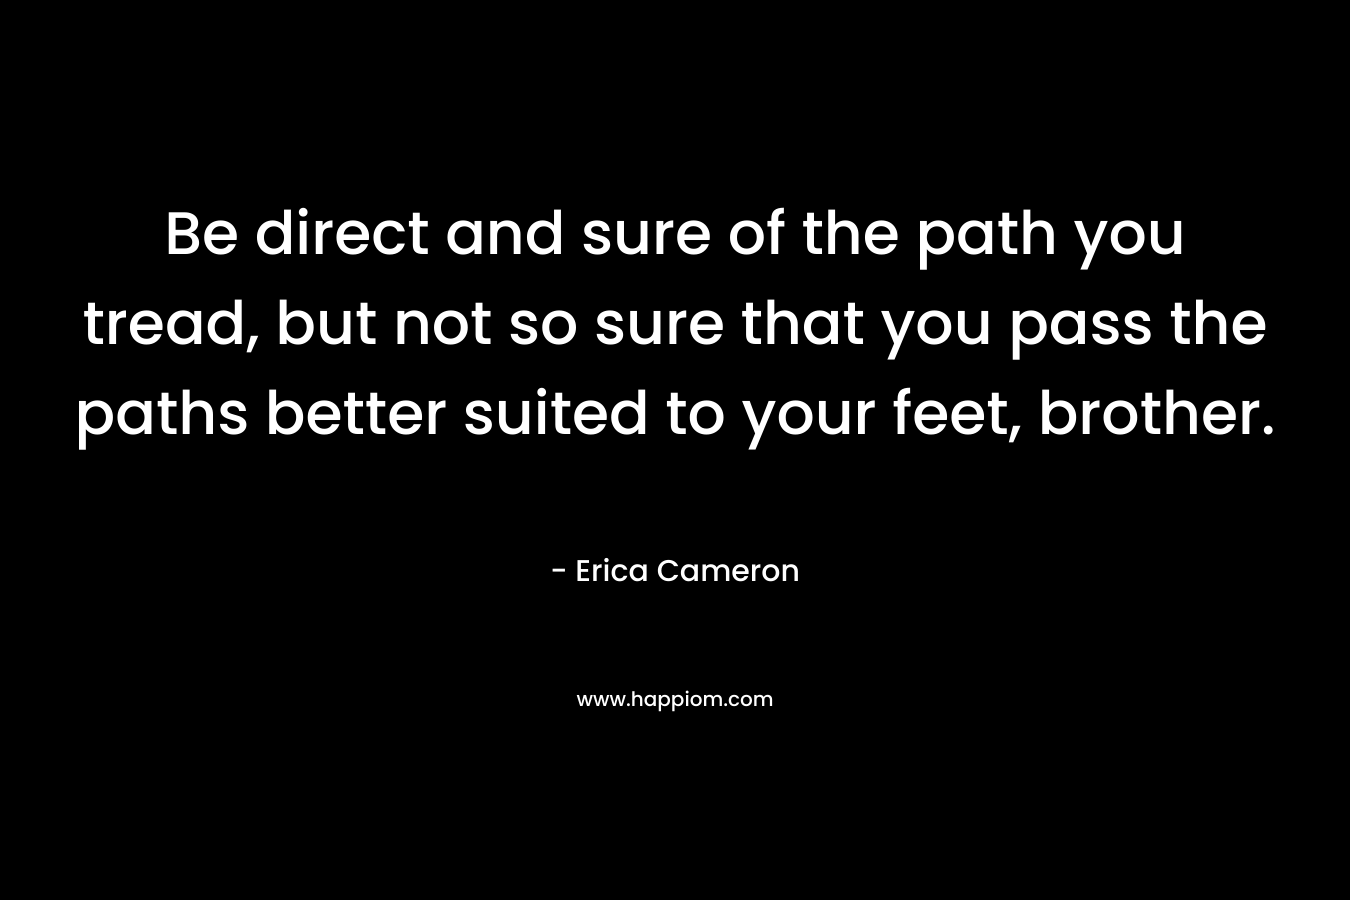 Be direct and sure of the path you tread, but not so sure that you pass the paths better suited to your feet, brother.